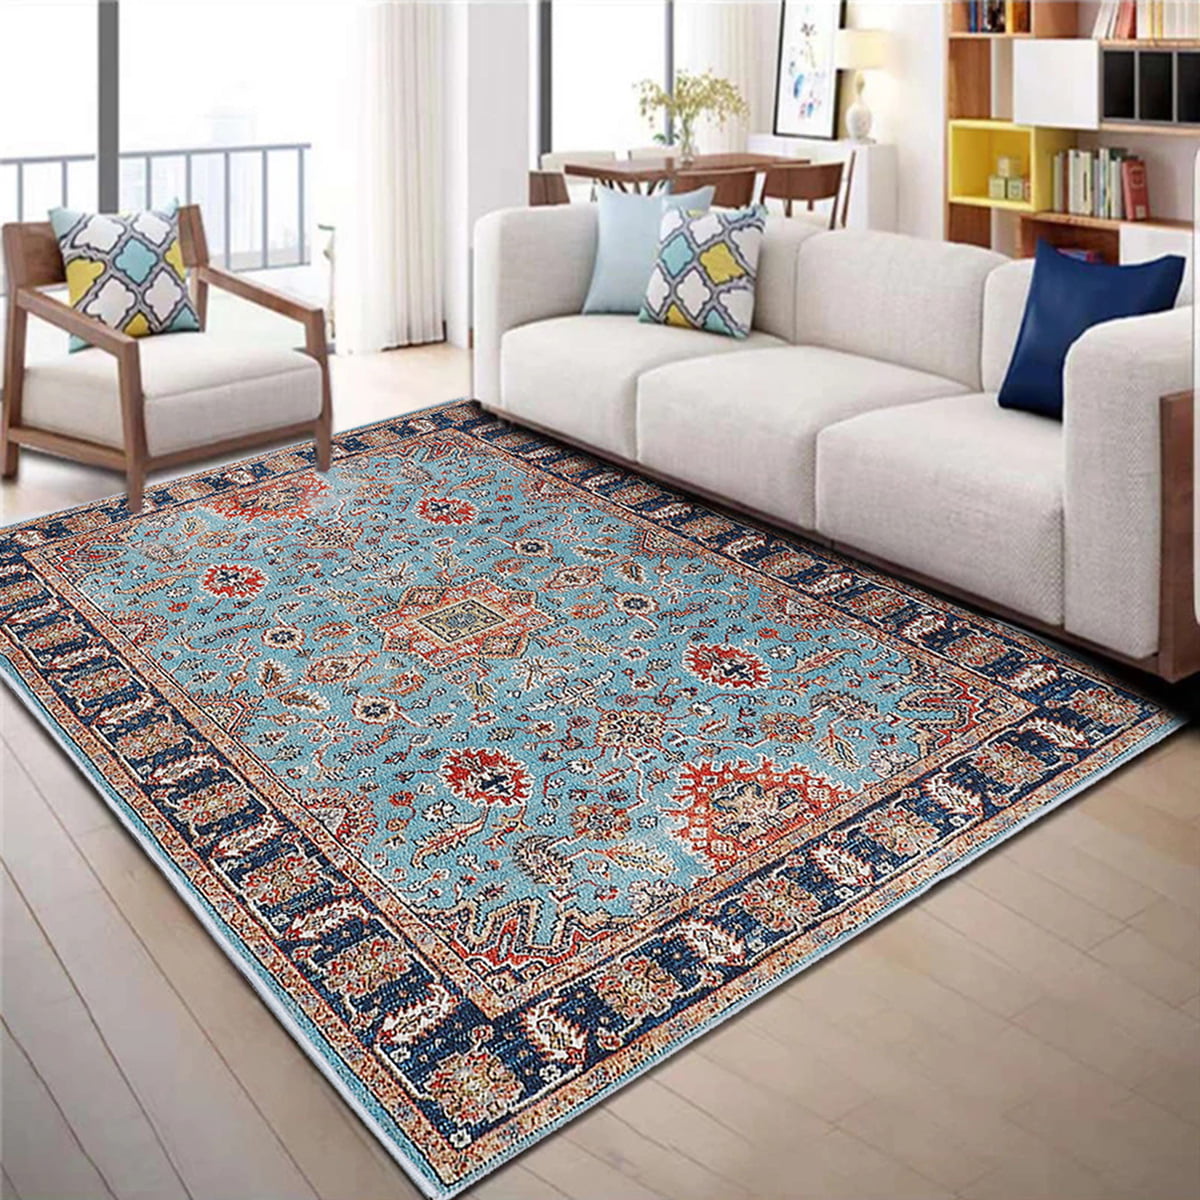 5' x 7' Area Rug Non-Shedding Stain Resistant Living Room Bedroom Accent Rug Rainbow Flower 